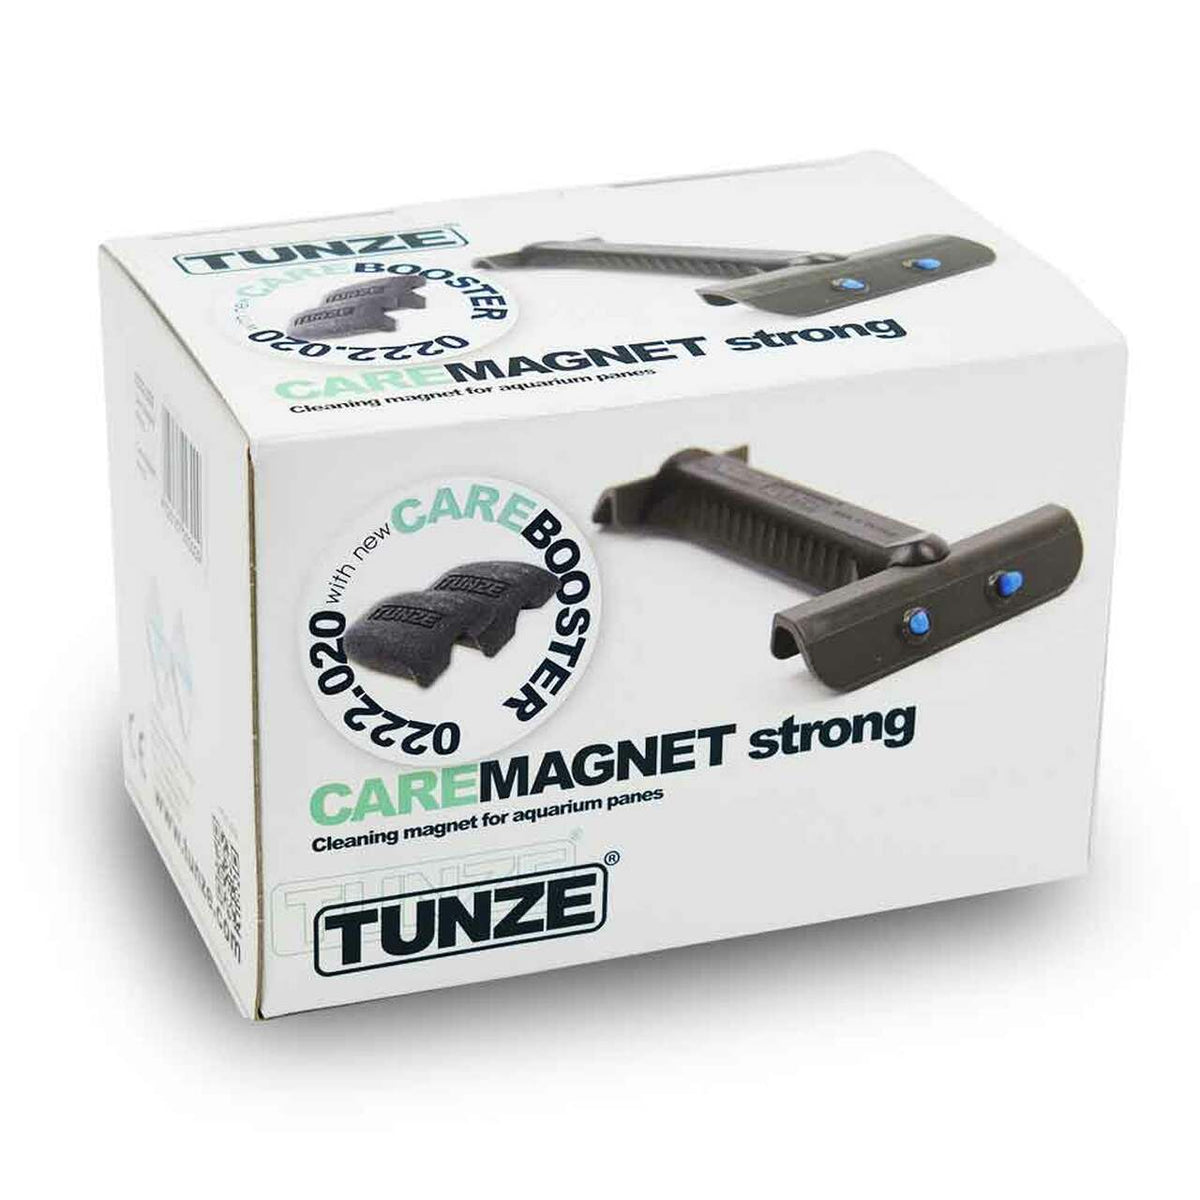 Care Magnet strong+ - Tunze